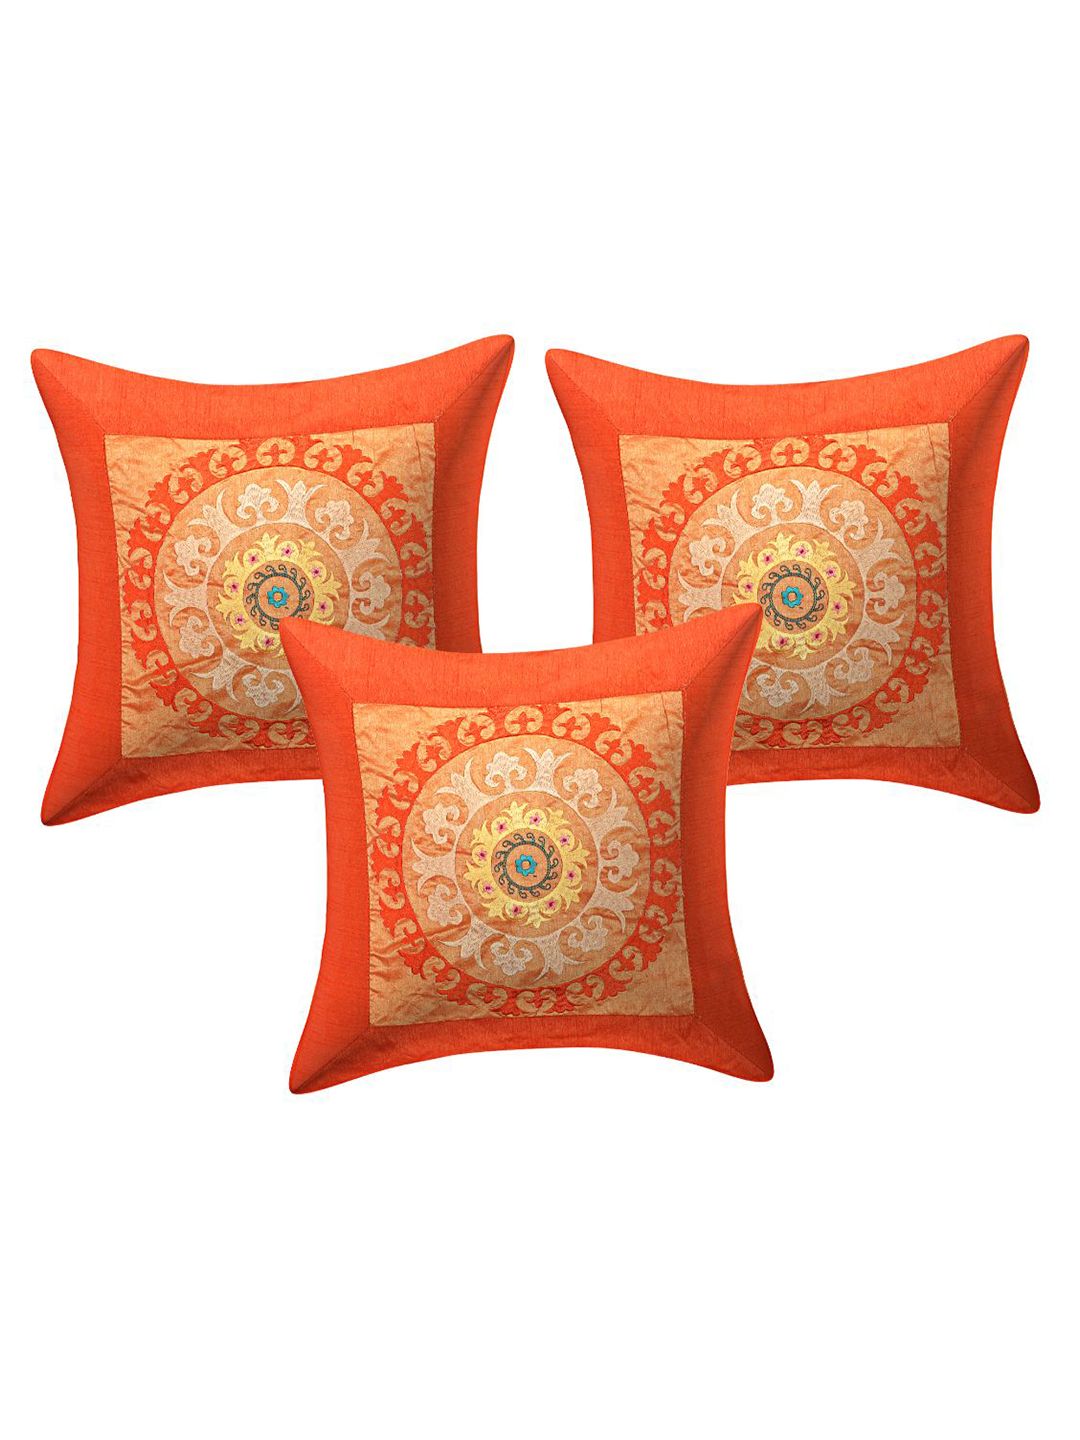 INDHOME LIFE Orange & Mustard Set of 3 Floral Square Cushion Covers Price in India